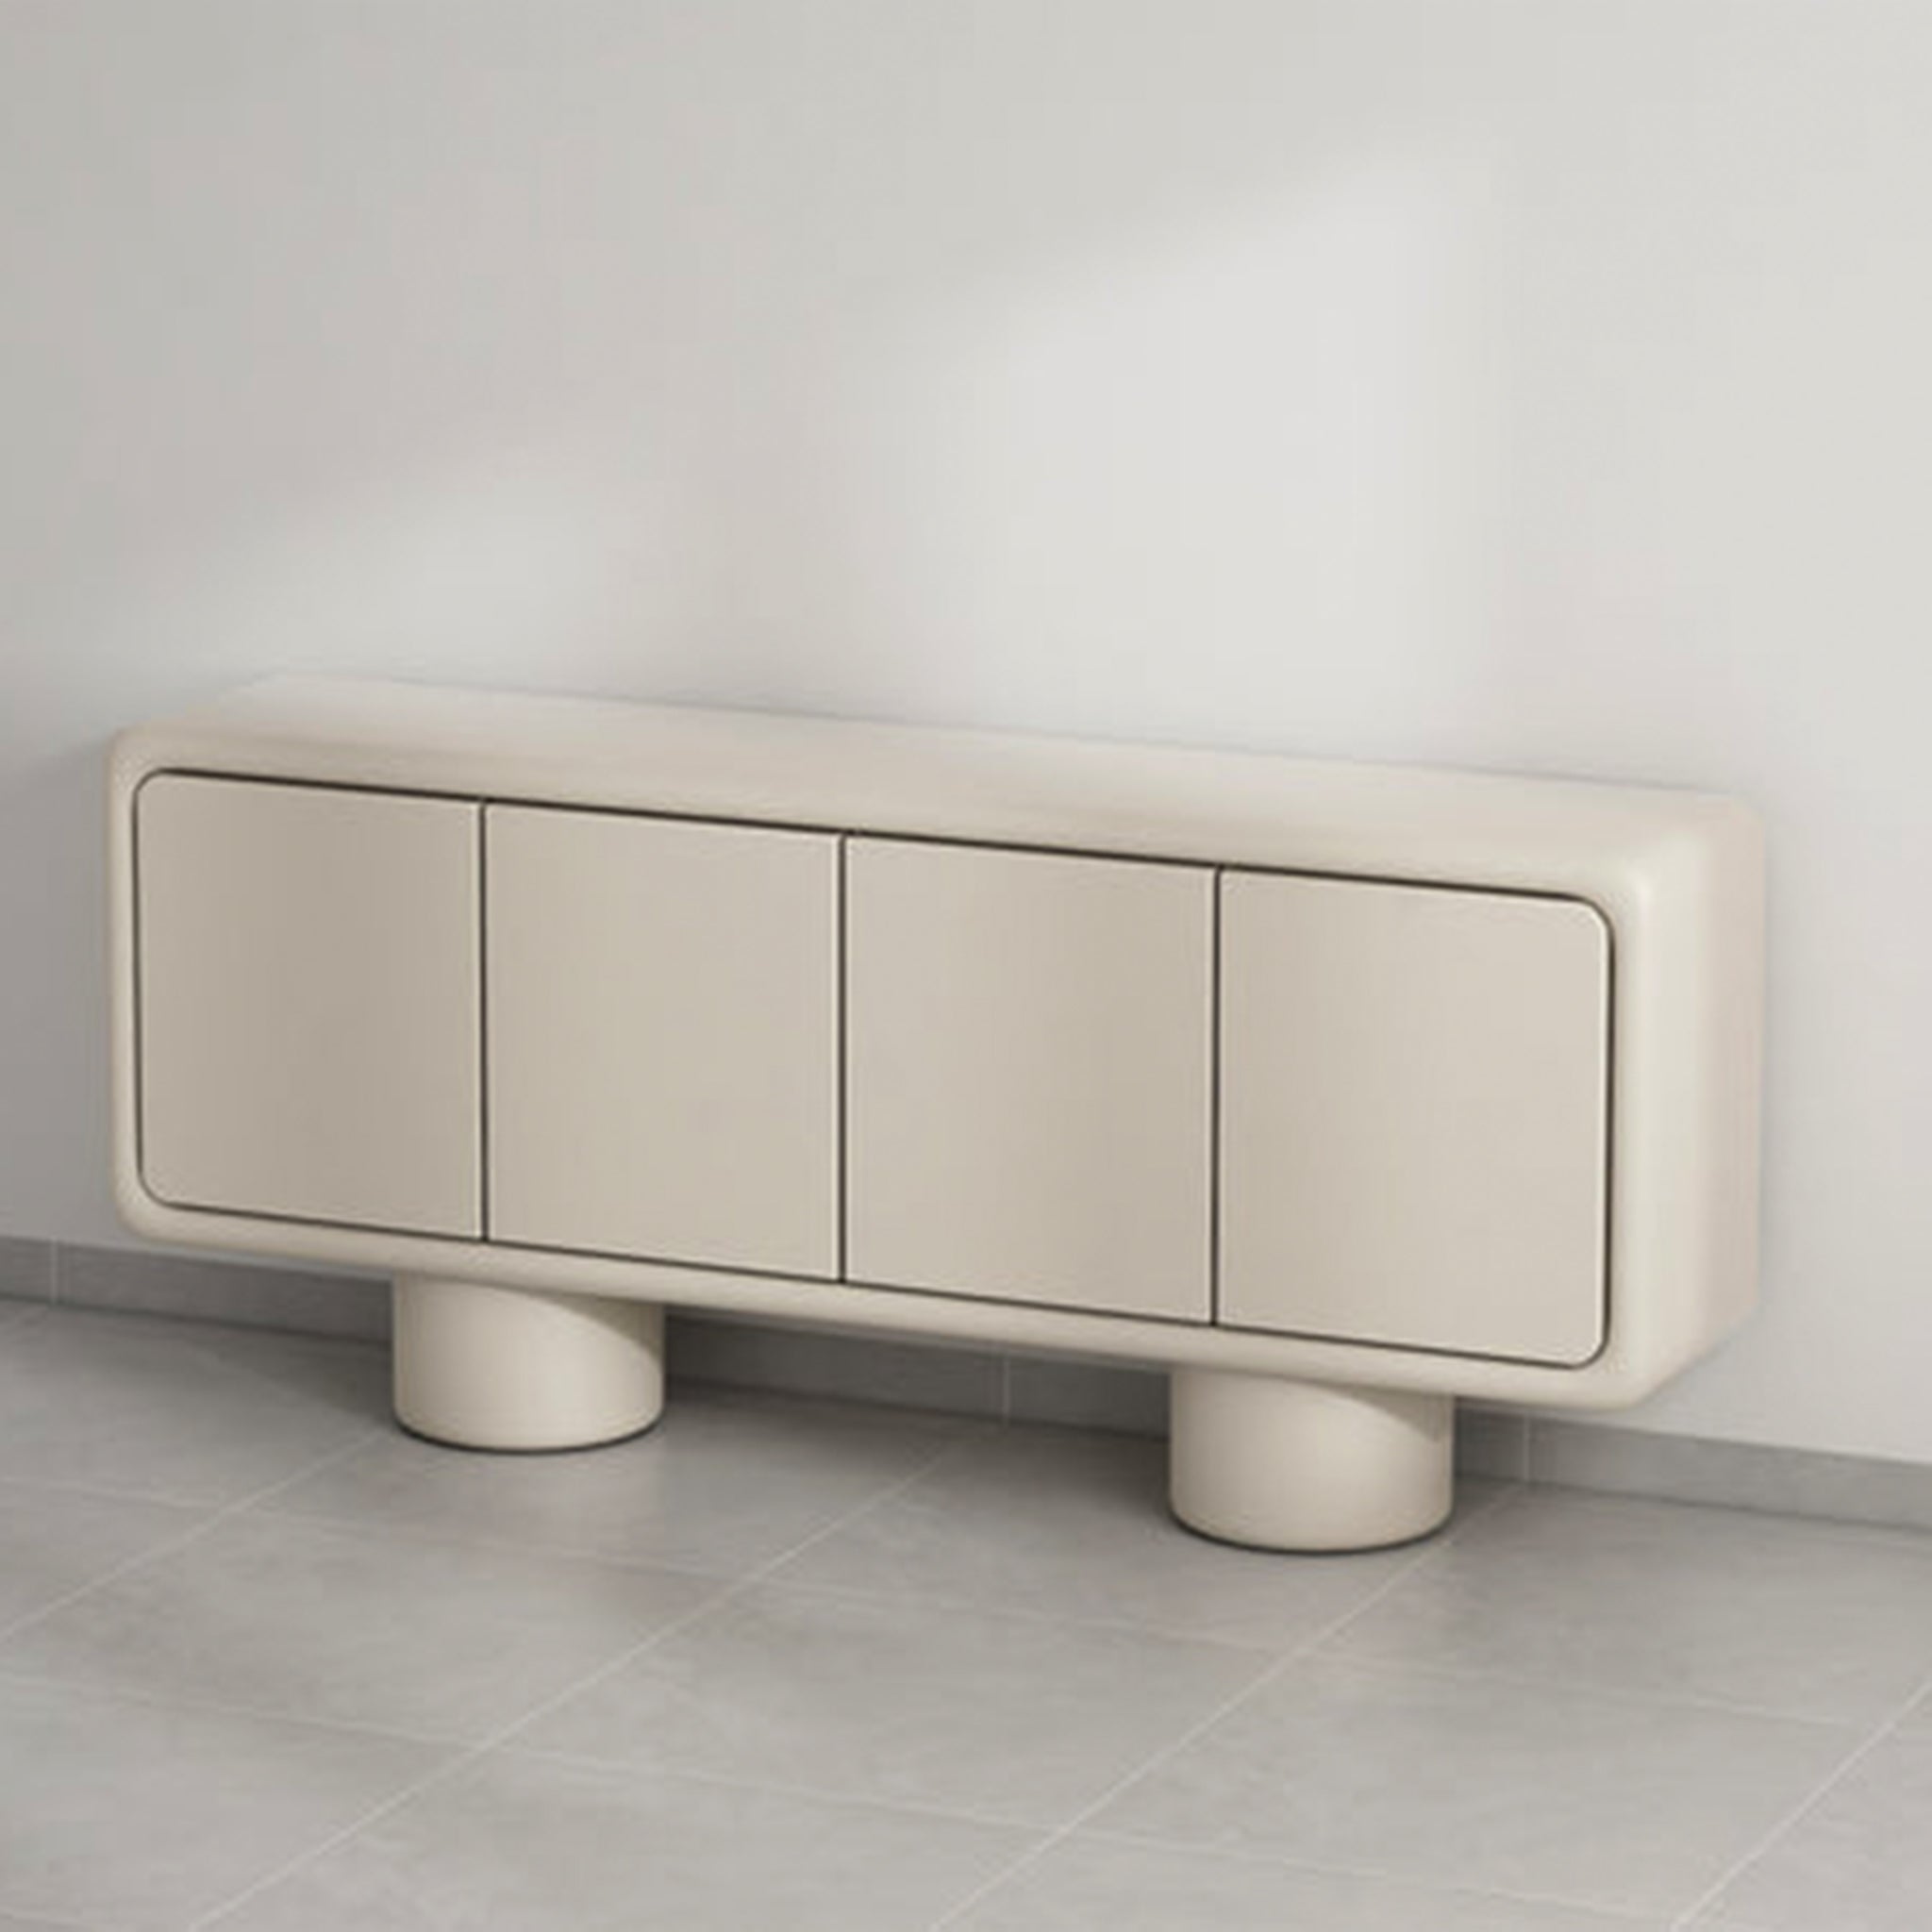 A stylish beige sideboard with a minimalist design, featuring four doors and supported by two cylindrical legs, placed against a wall in a modern interior.